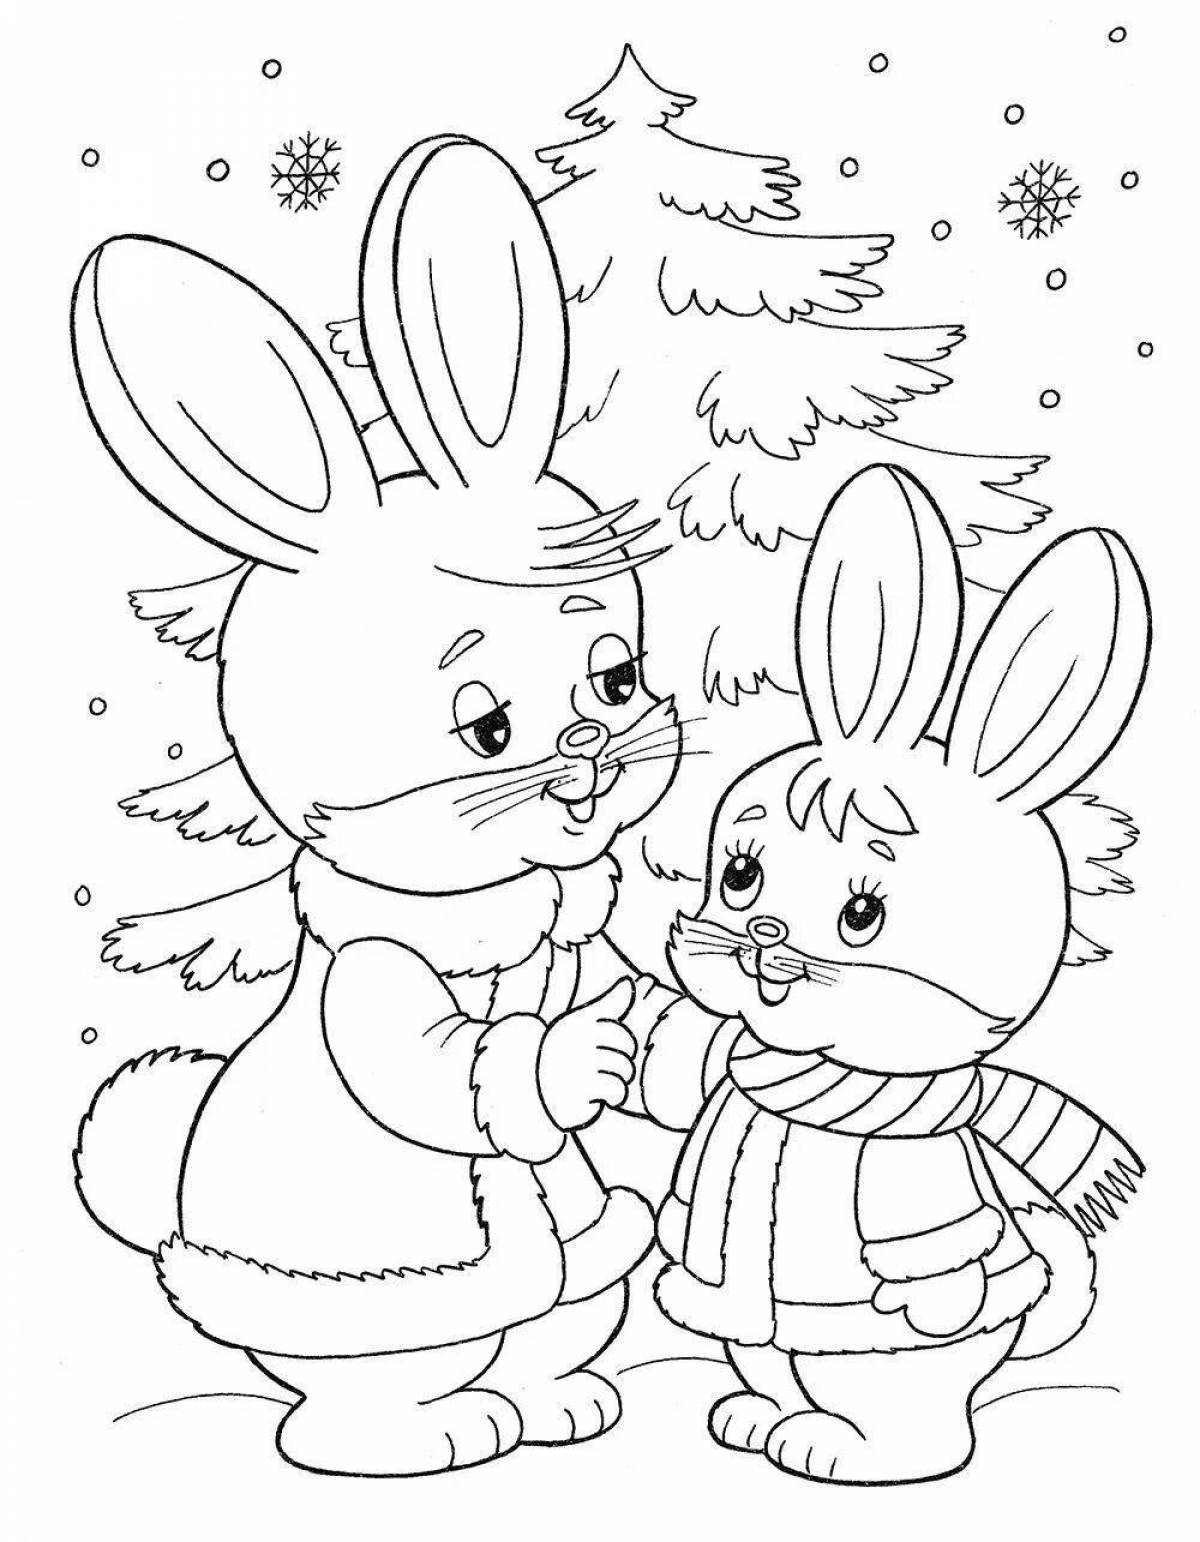 Animated hare and tree coloring page